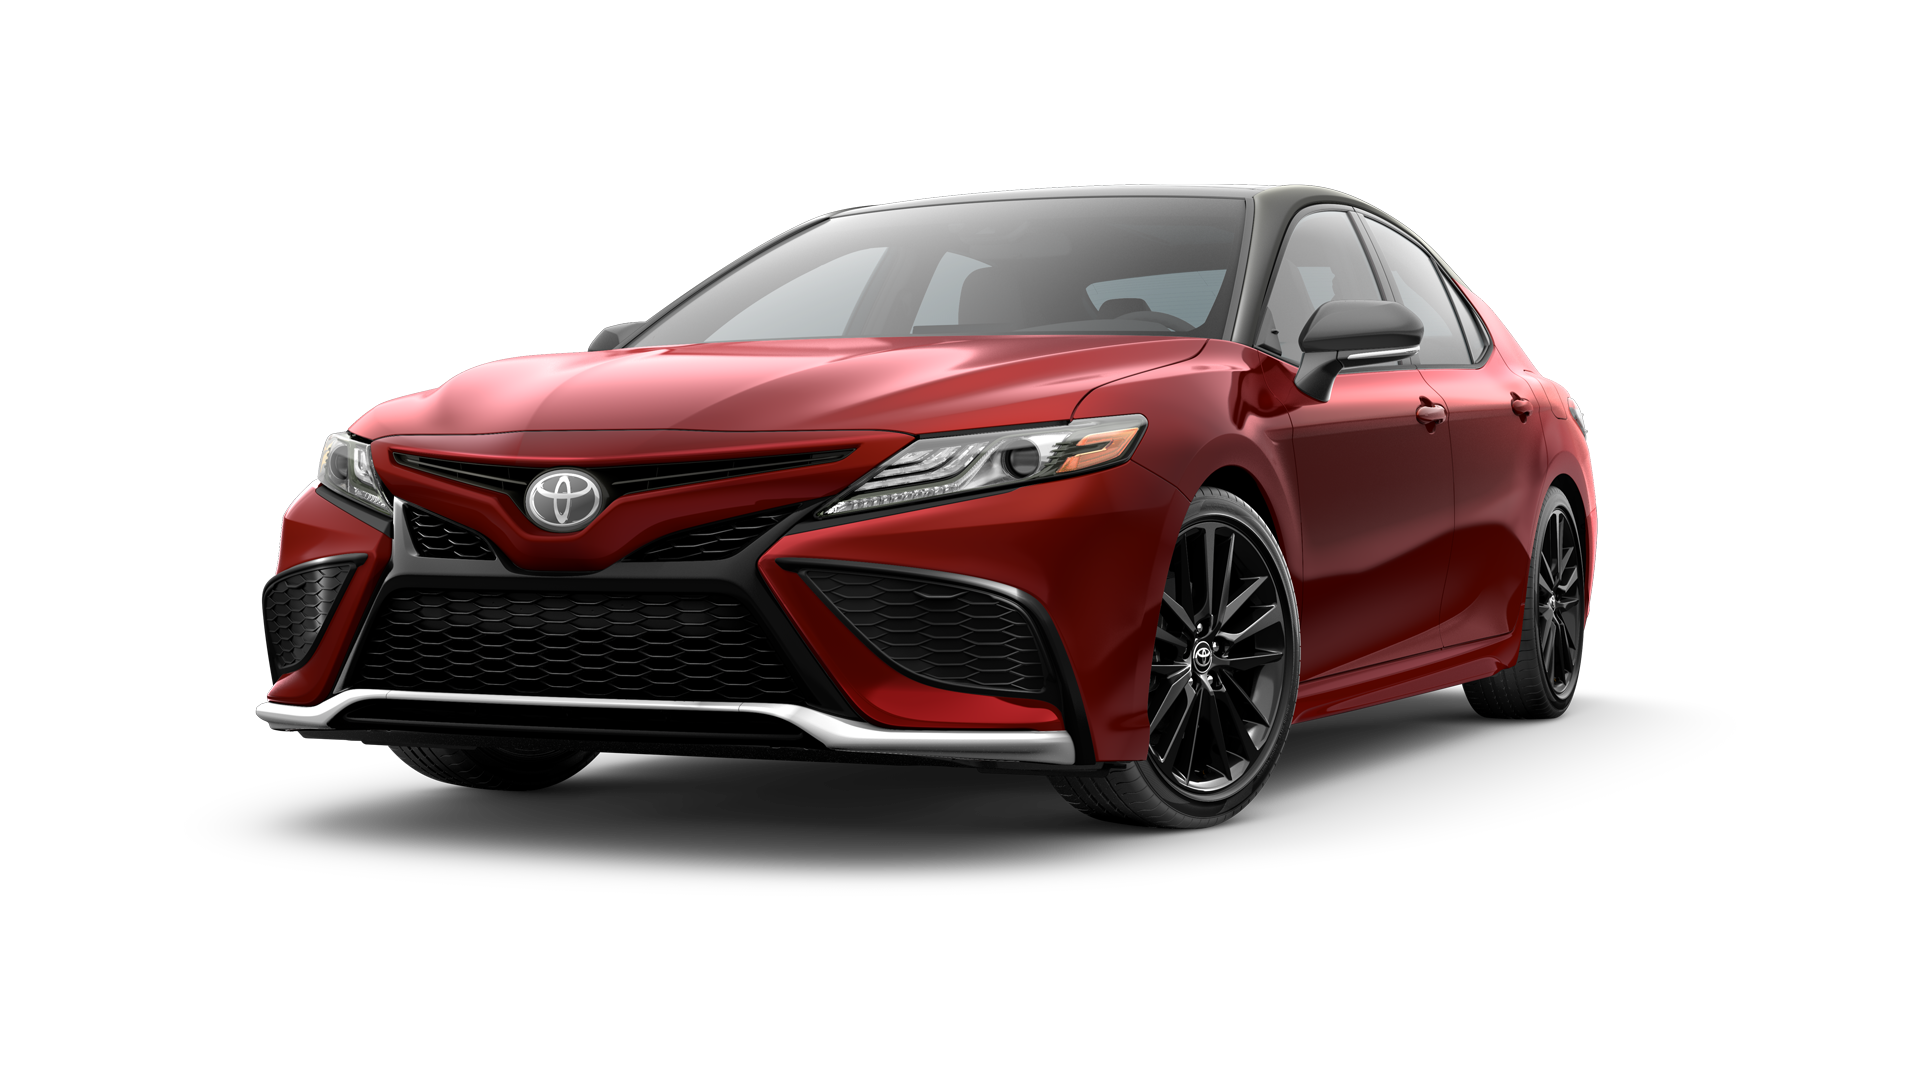 2023 Toyota Camry in Supersonic Red/Midnight Black Metallic Roof*.